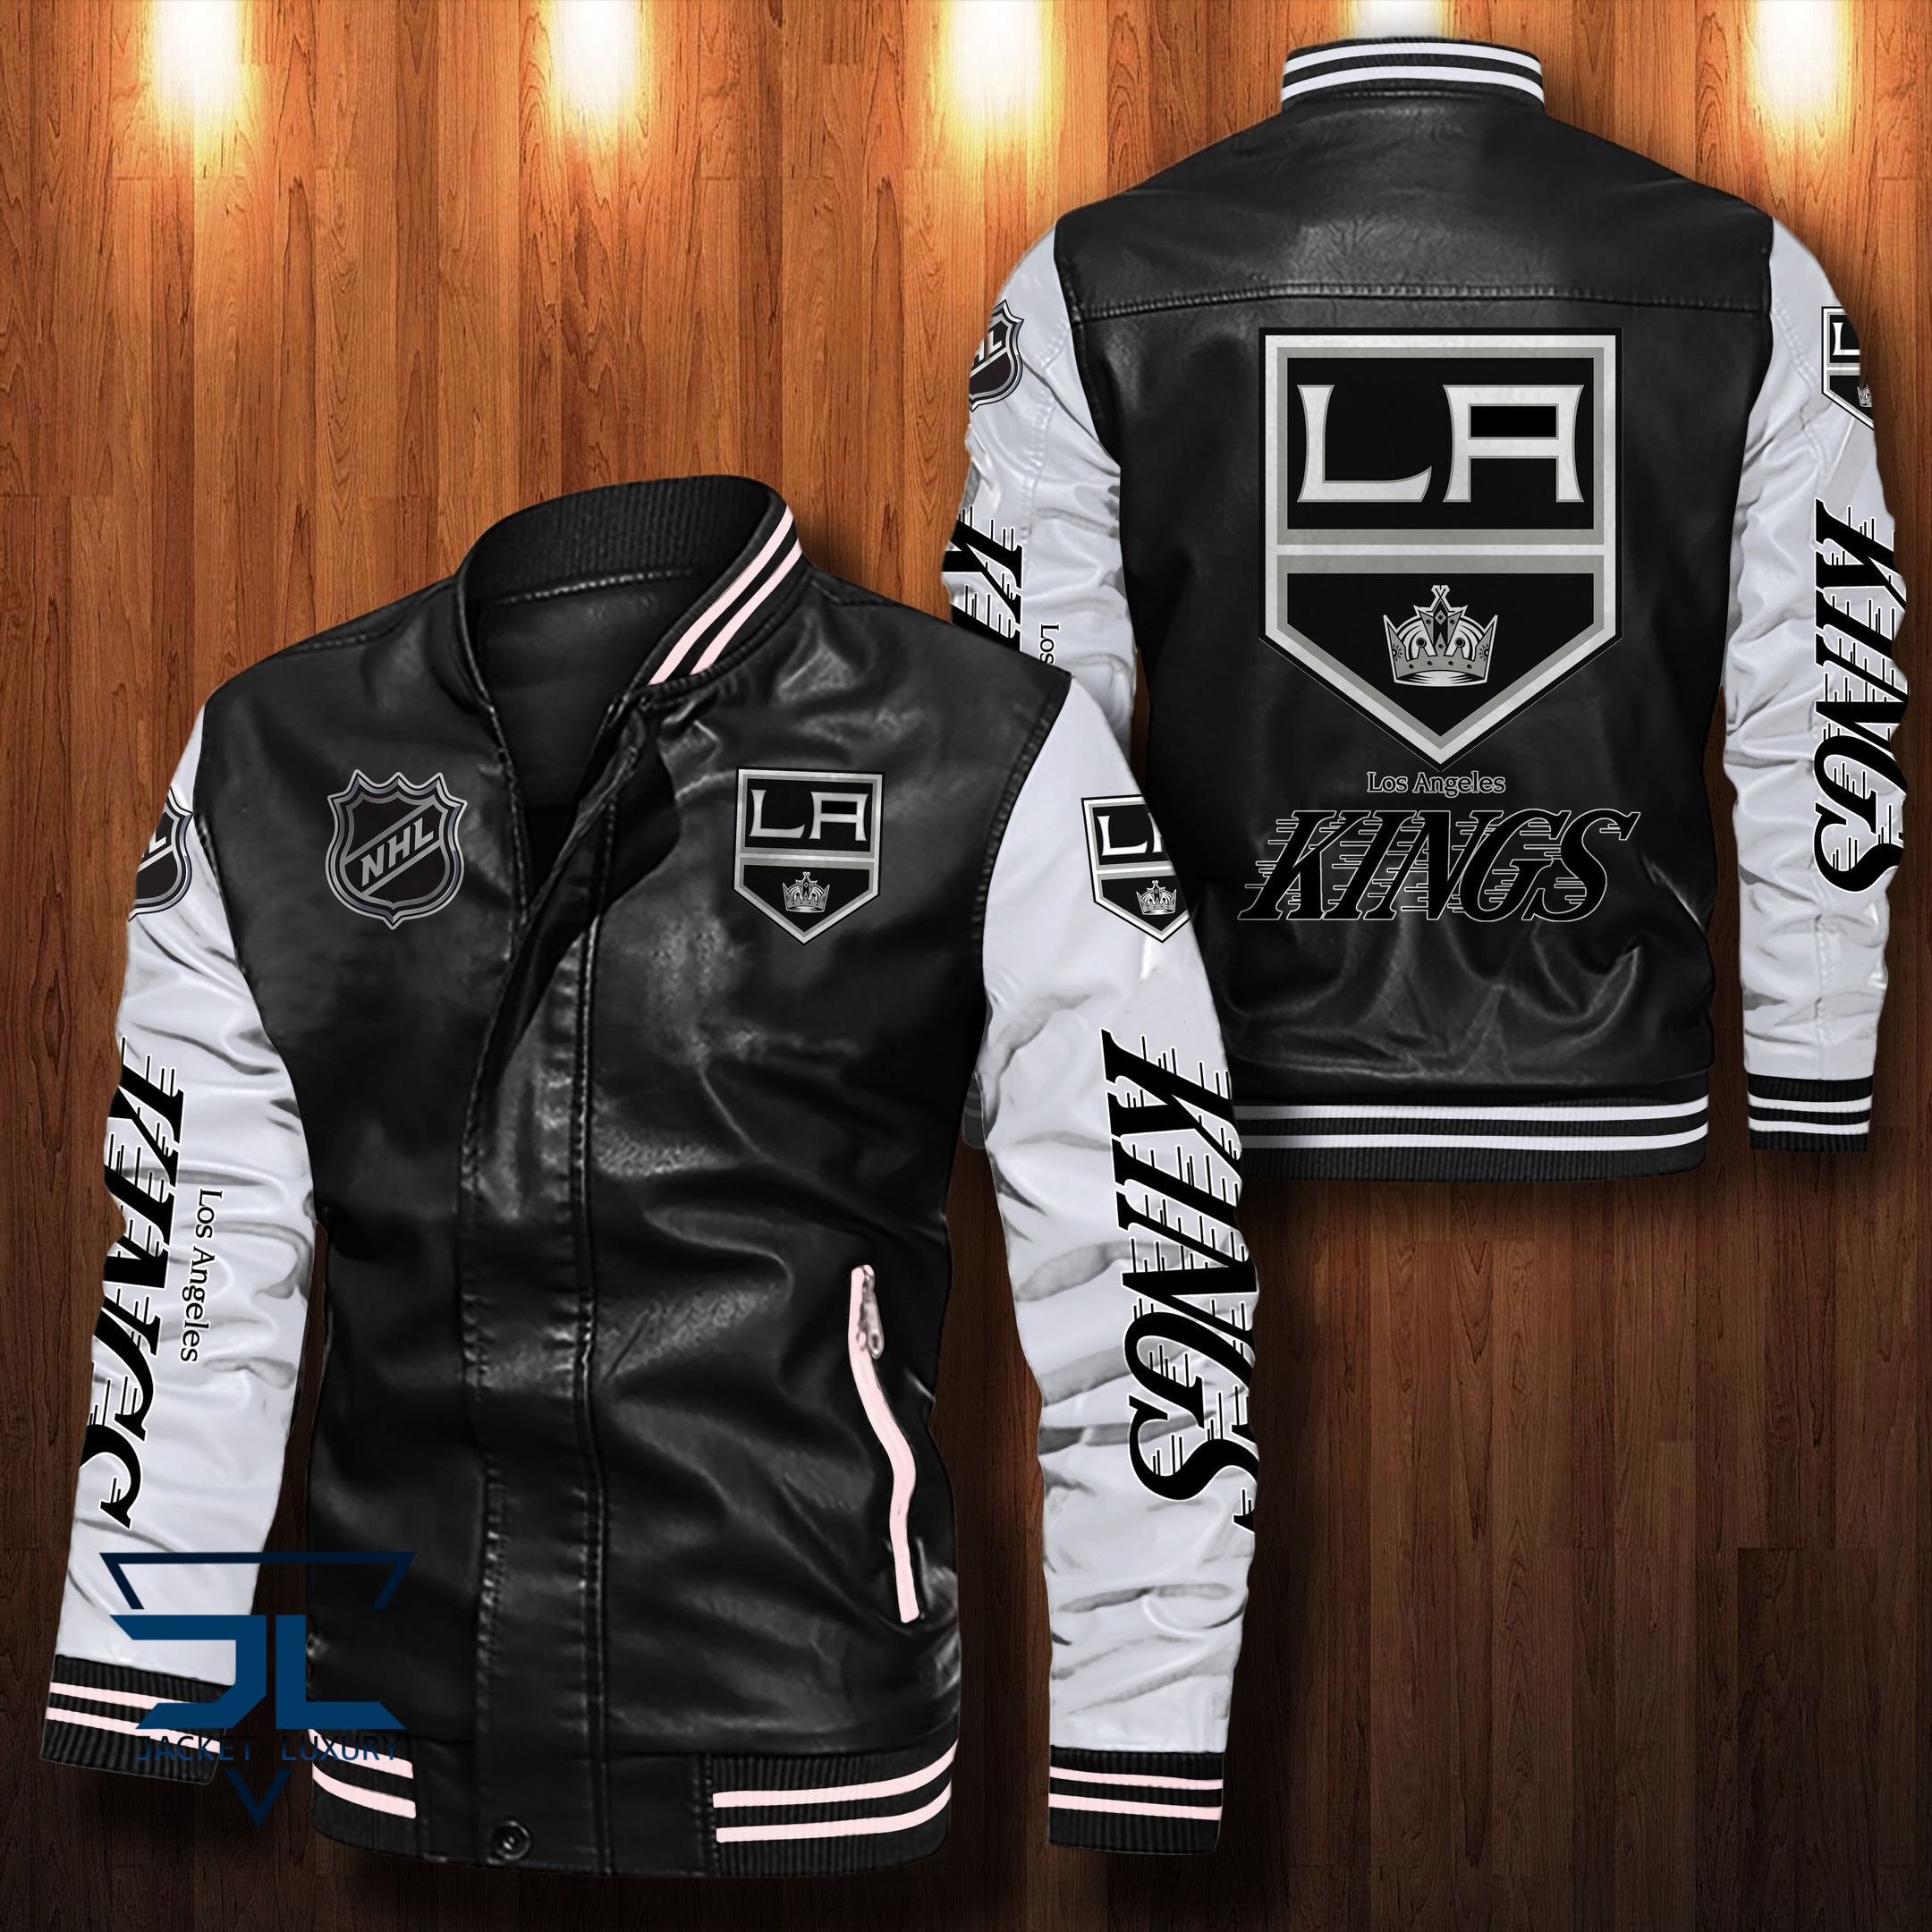 HOT Jacket only $69,99 so don't miss out - Be sure to pick up yours today! 169